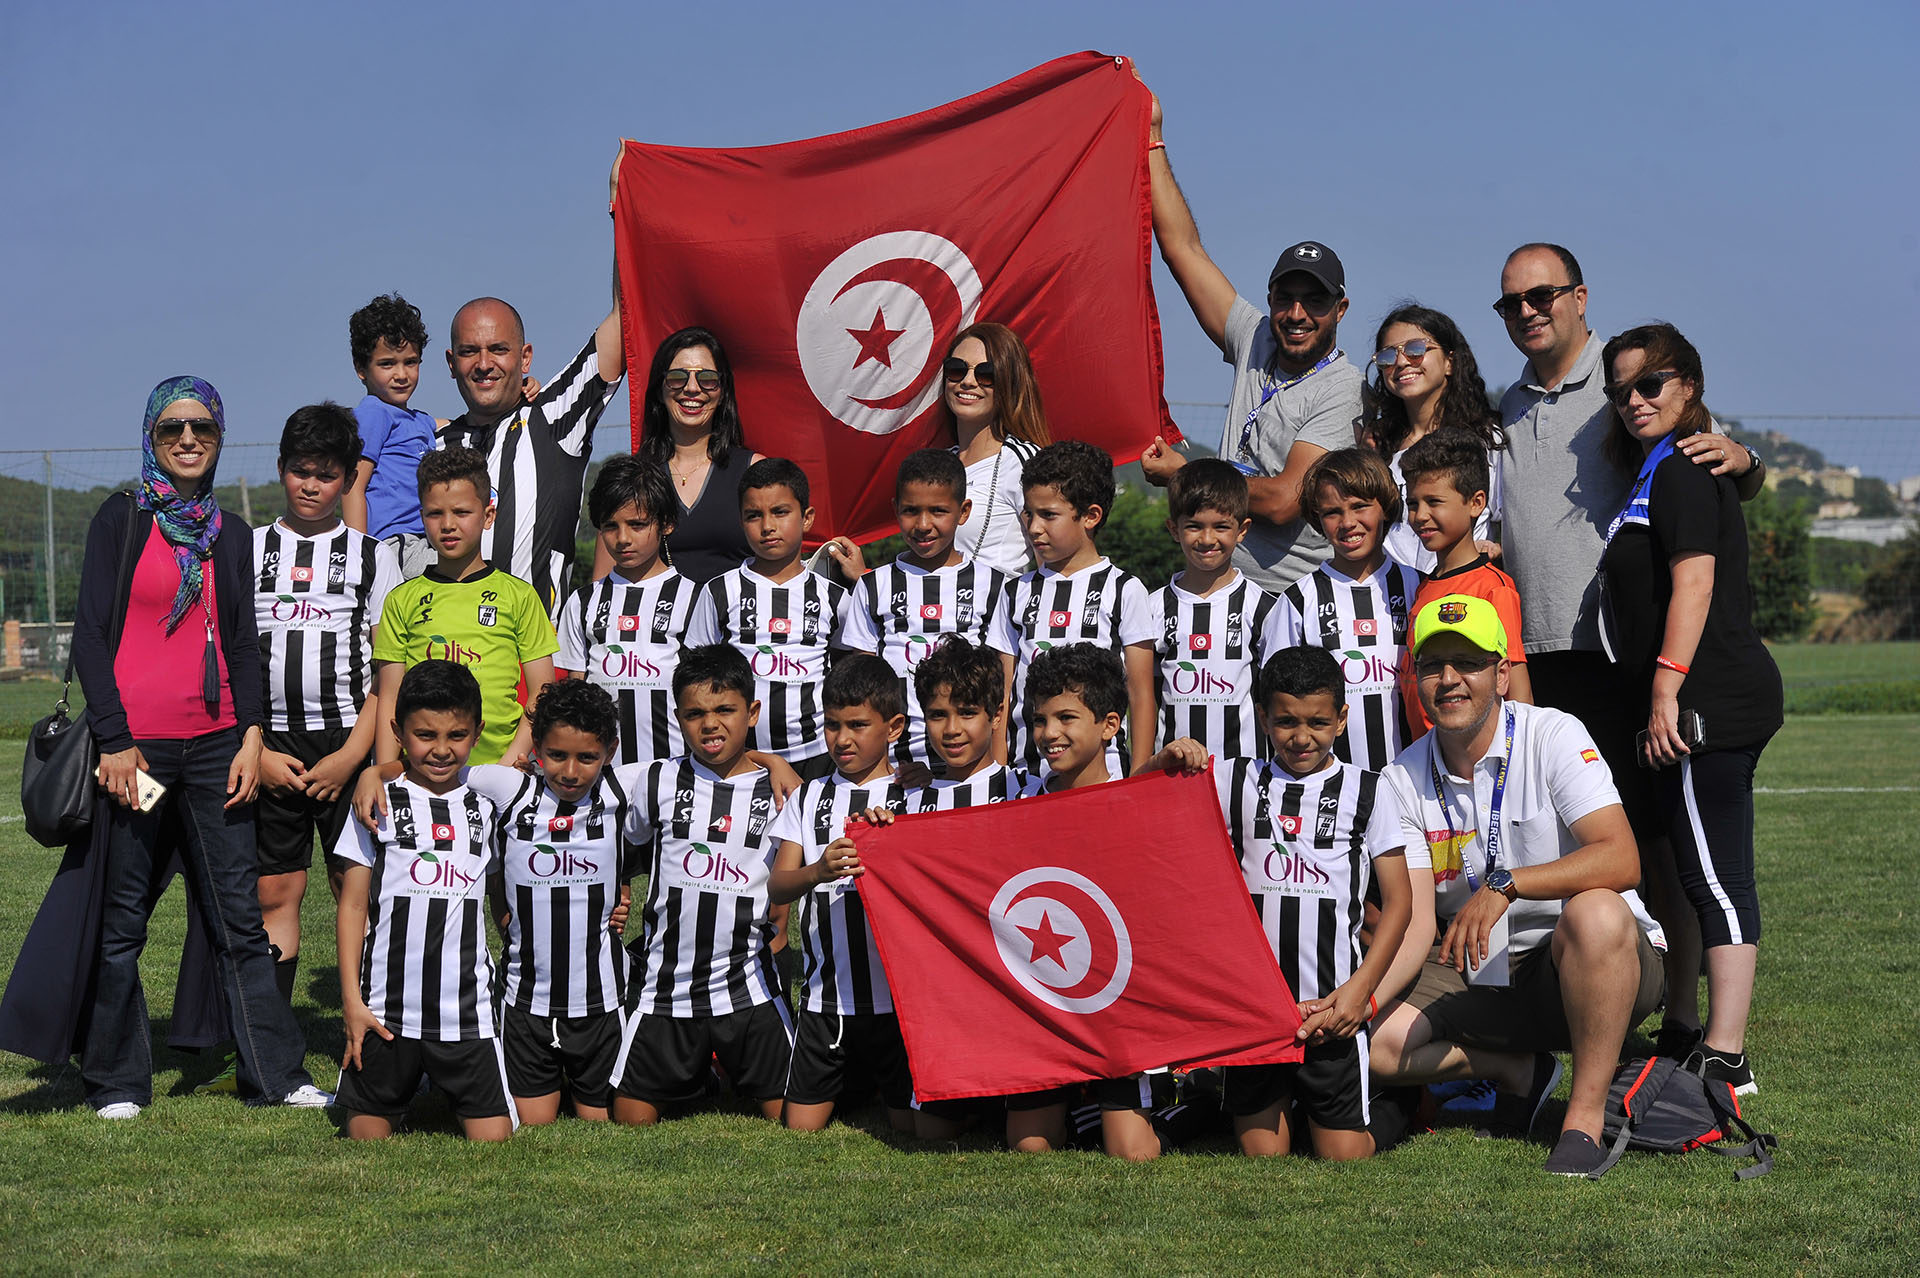 IberCup Barcelona - team on the tournament - Road to Sport